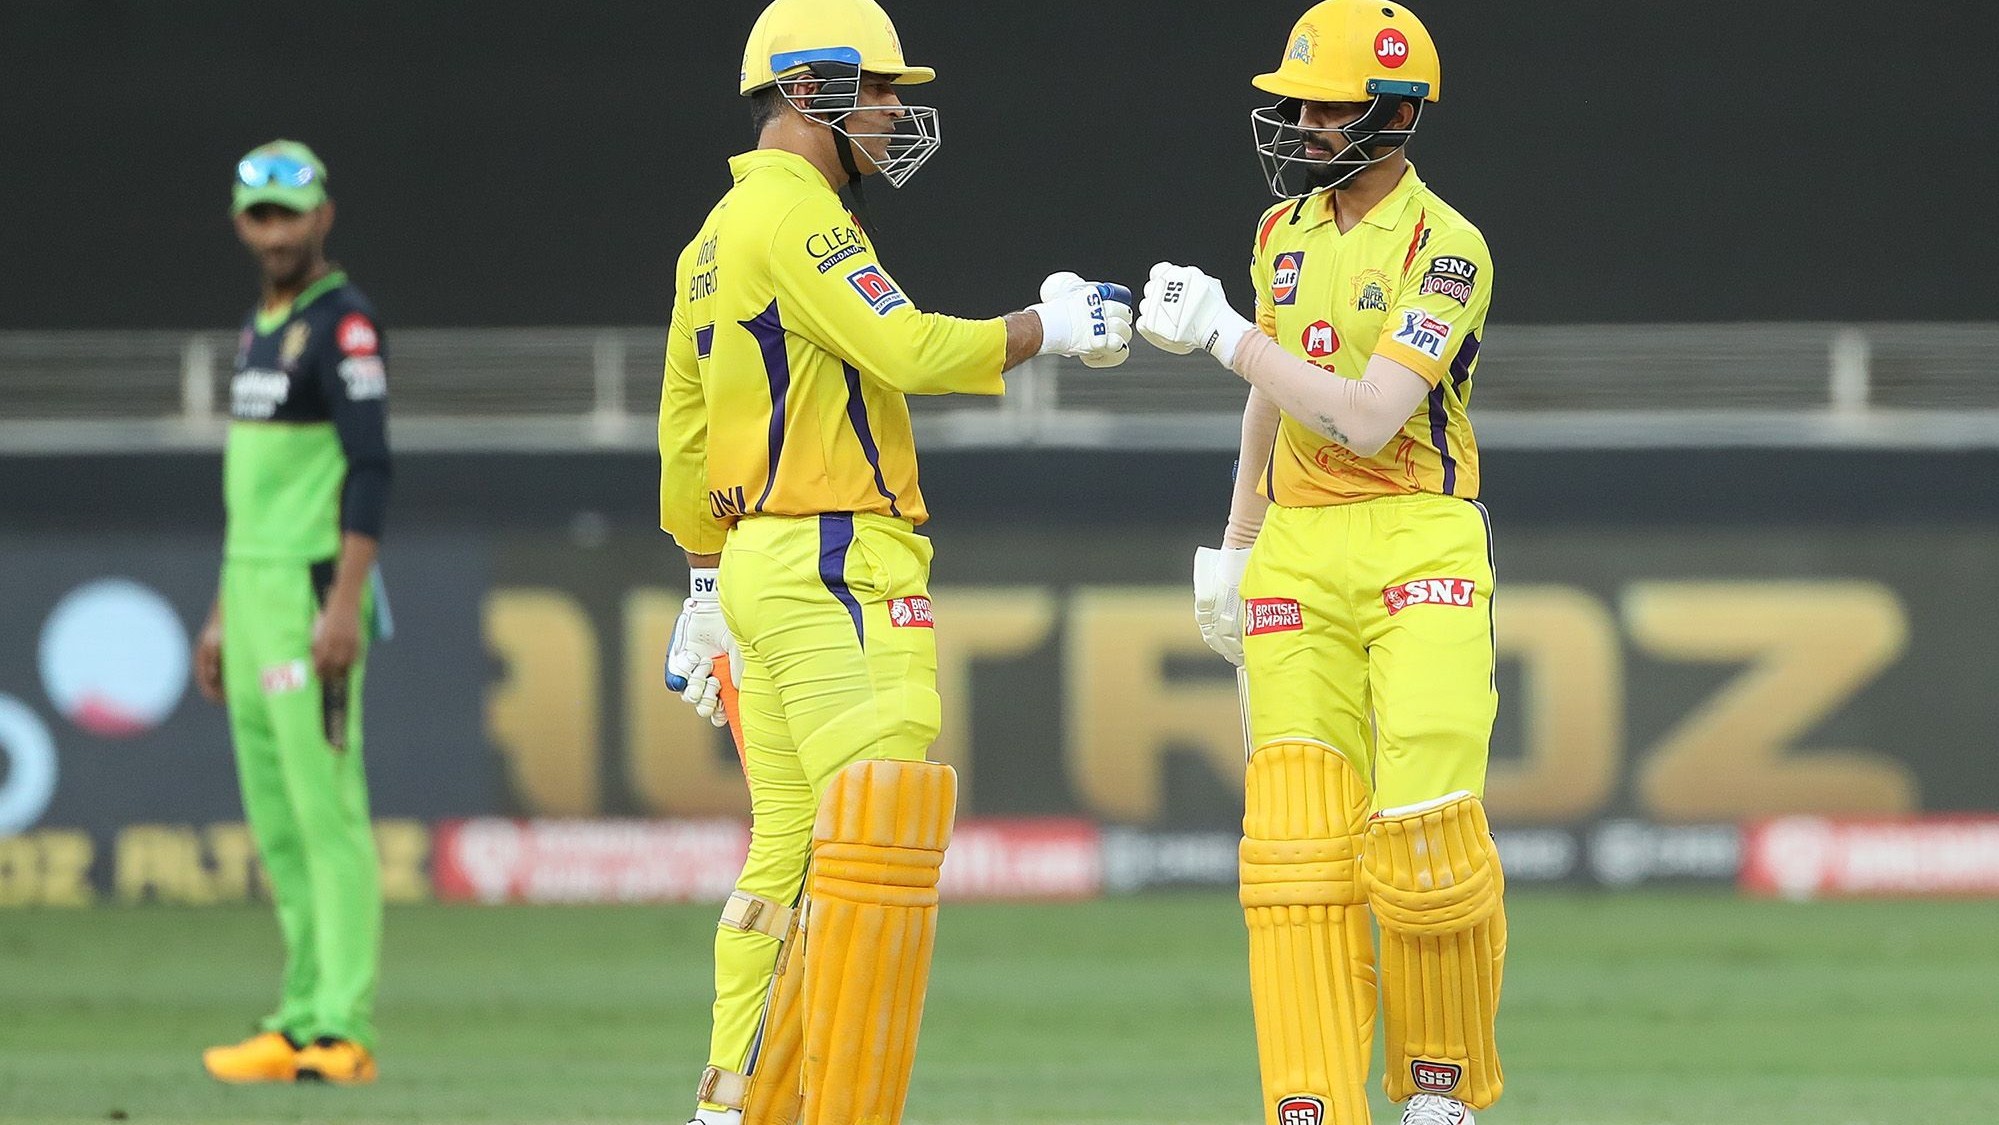 IPL 2020: Ruturaj Gaikwad elated after sharing partnership with MS Dhoni during CSK’s win over RCB